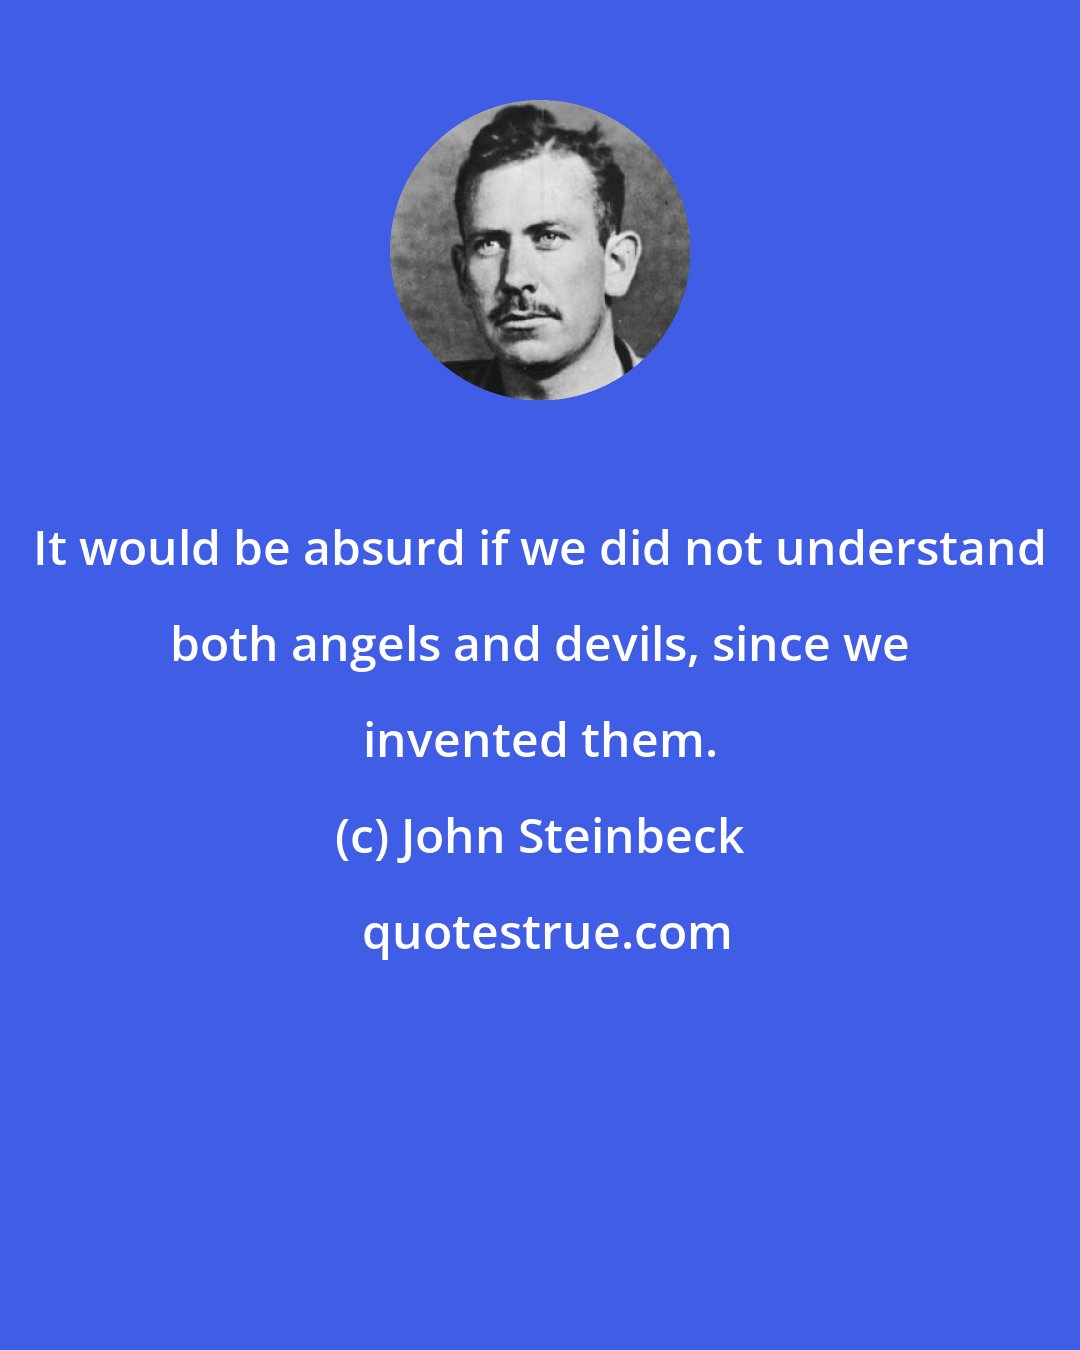 John Steinbeck: It would be absurd if we did not understand both angels and devils, since we invented them.